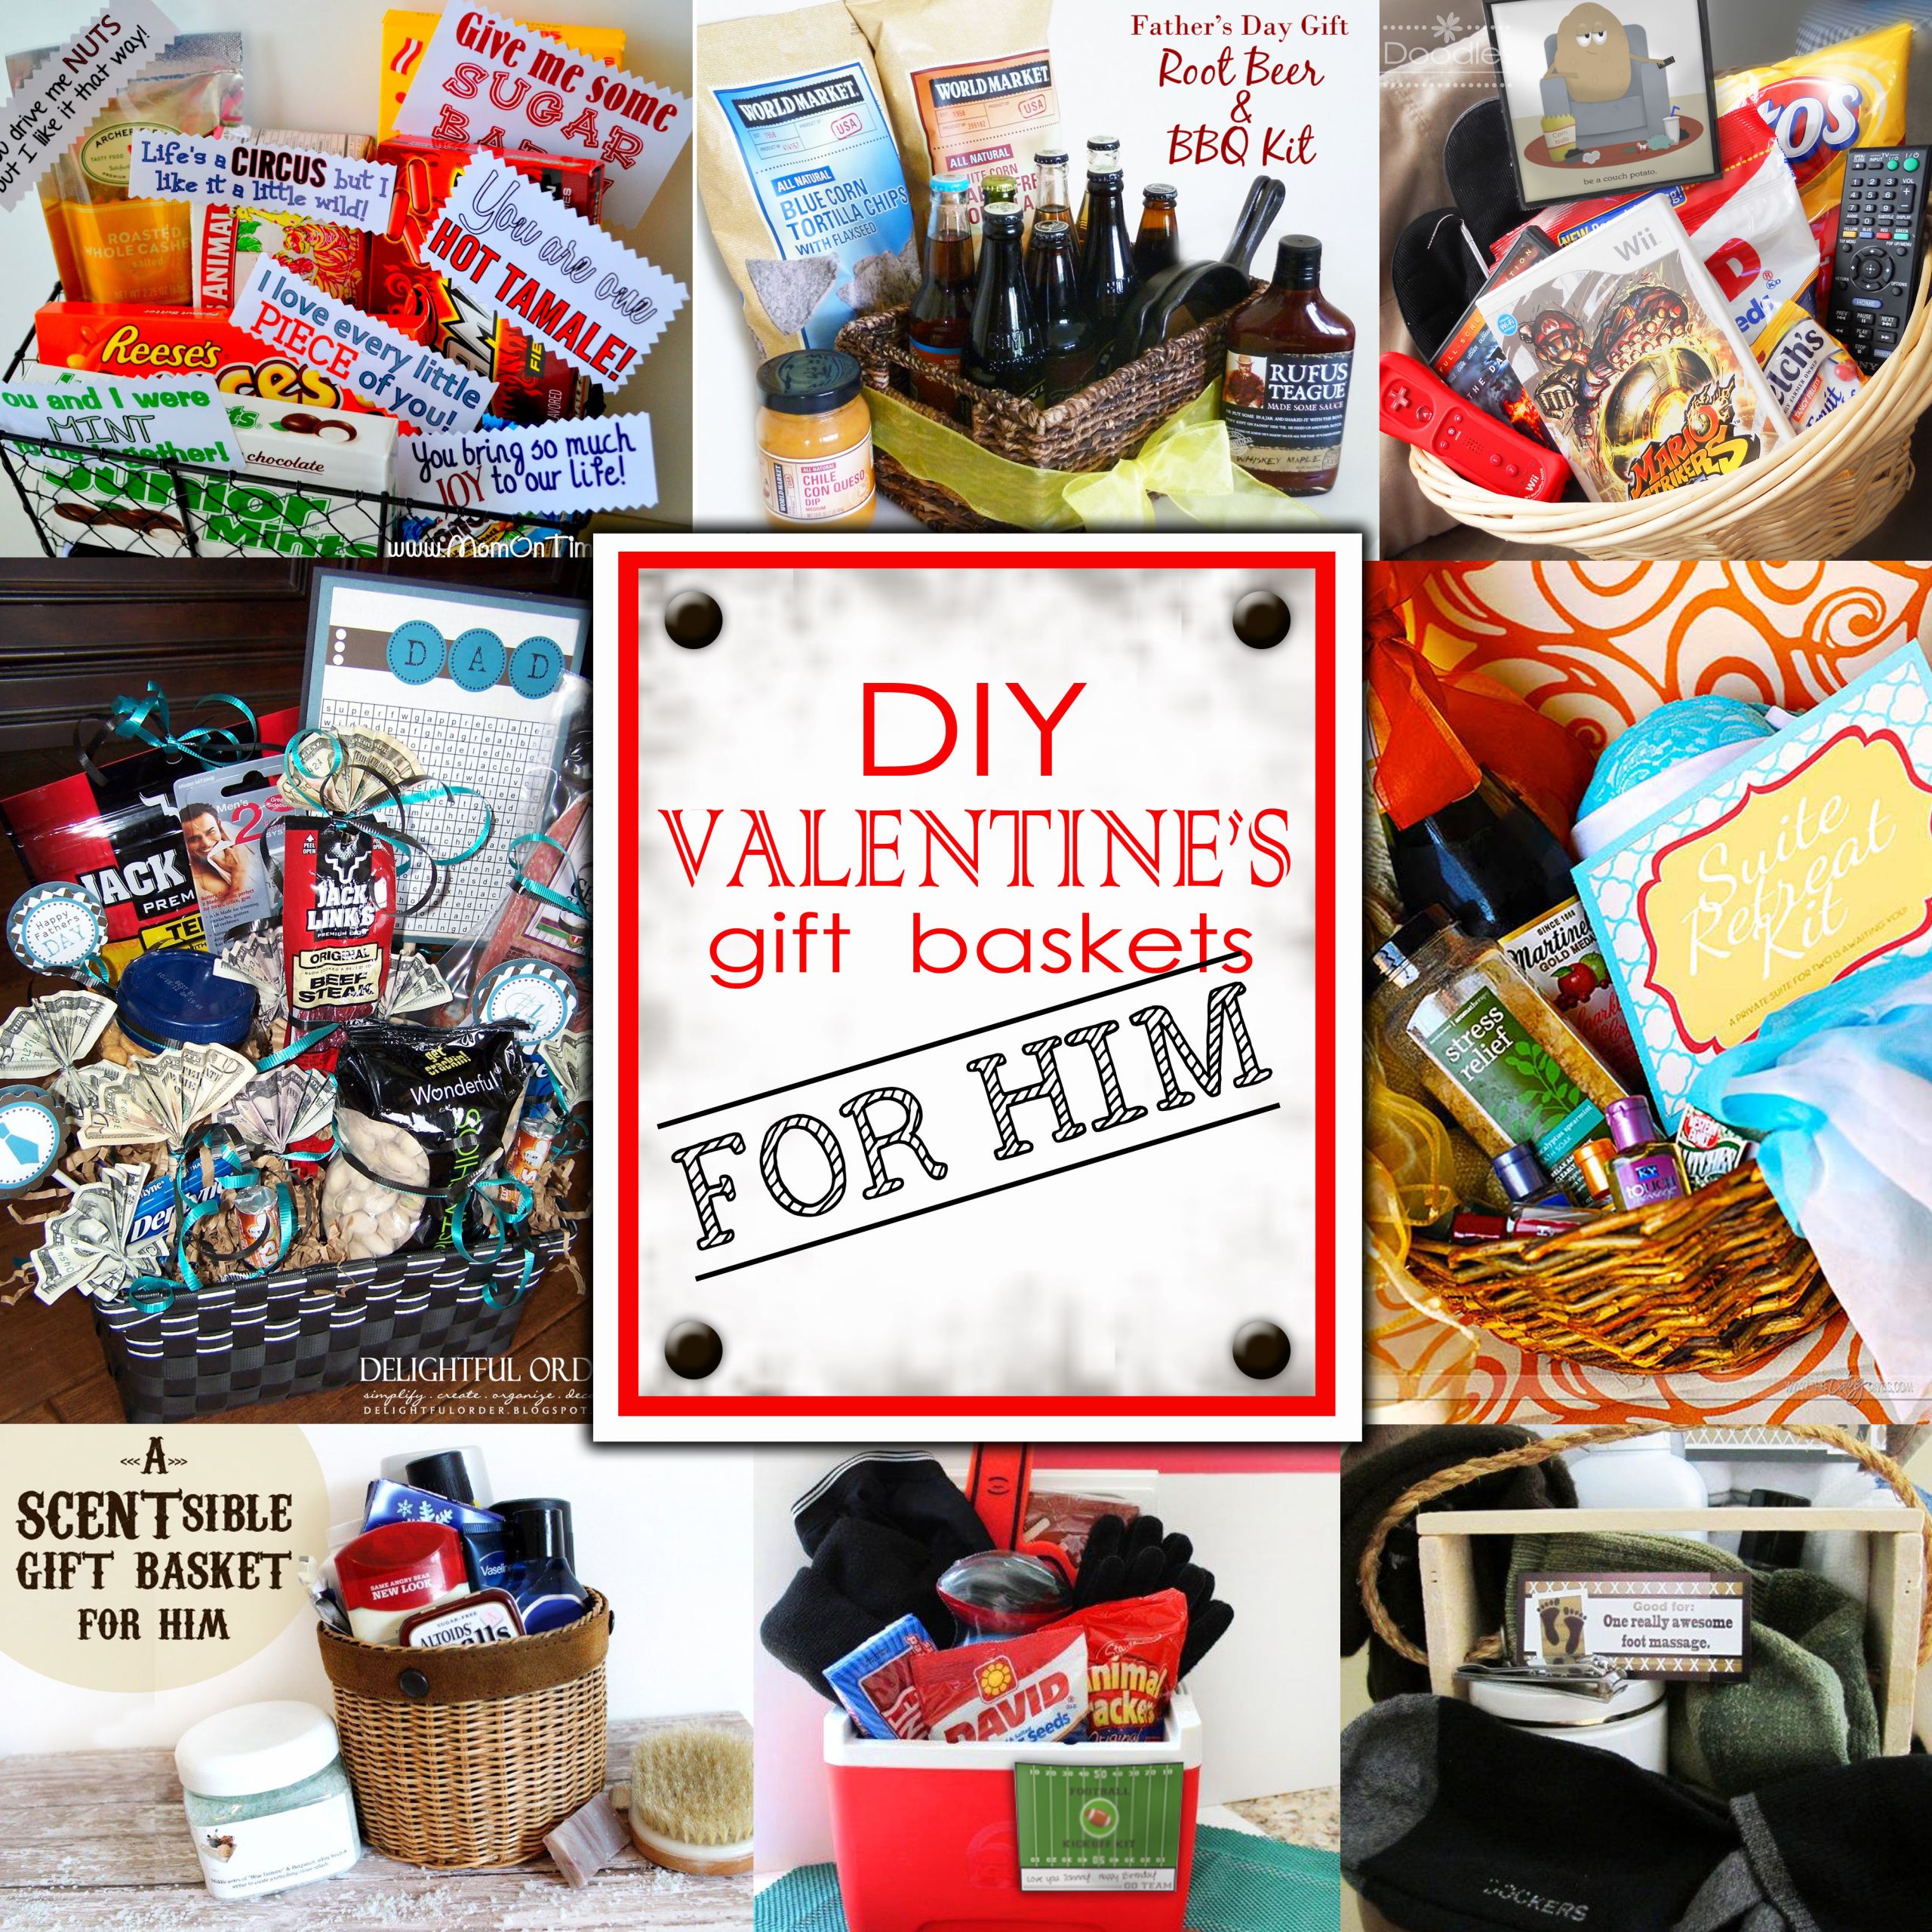 Valentines Gift Ideas for Him Luxury Diy Valentine S Day Gift Baskets for Him Darling Doodles